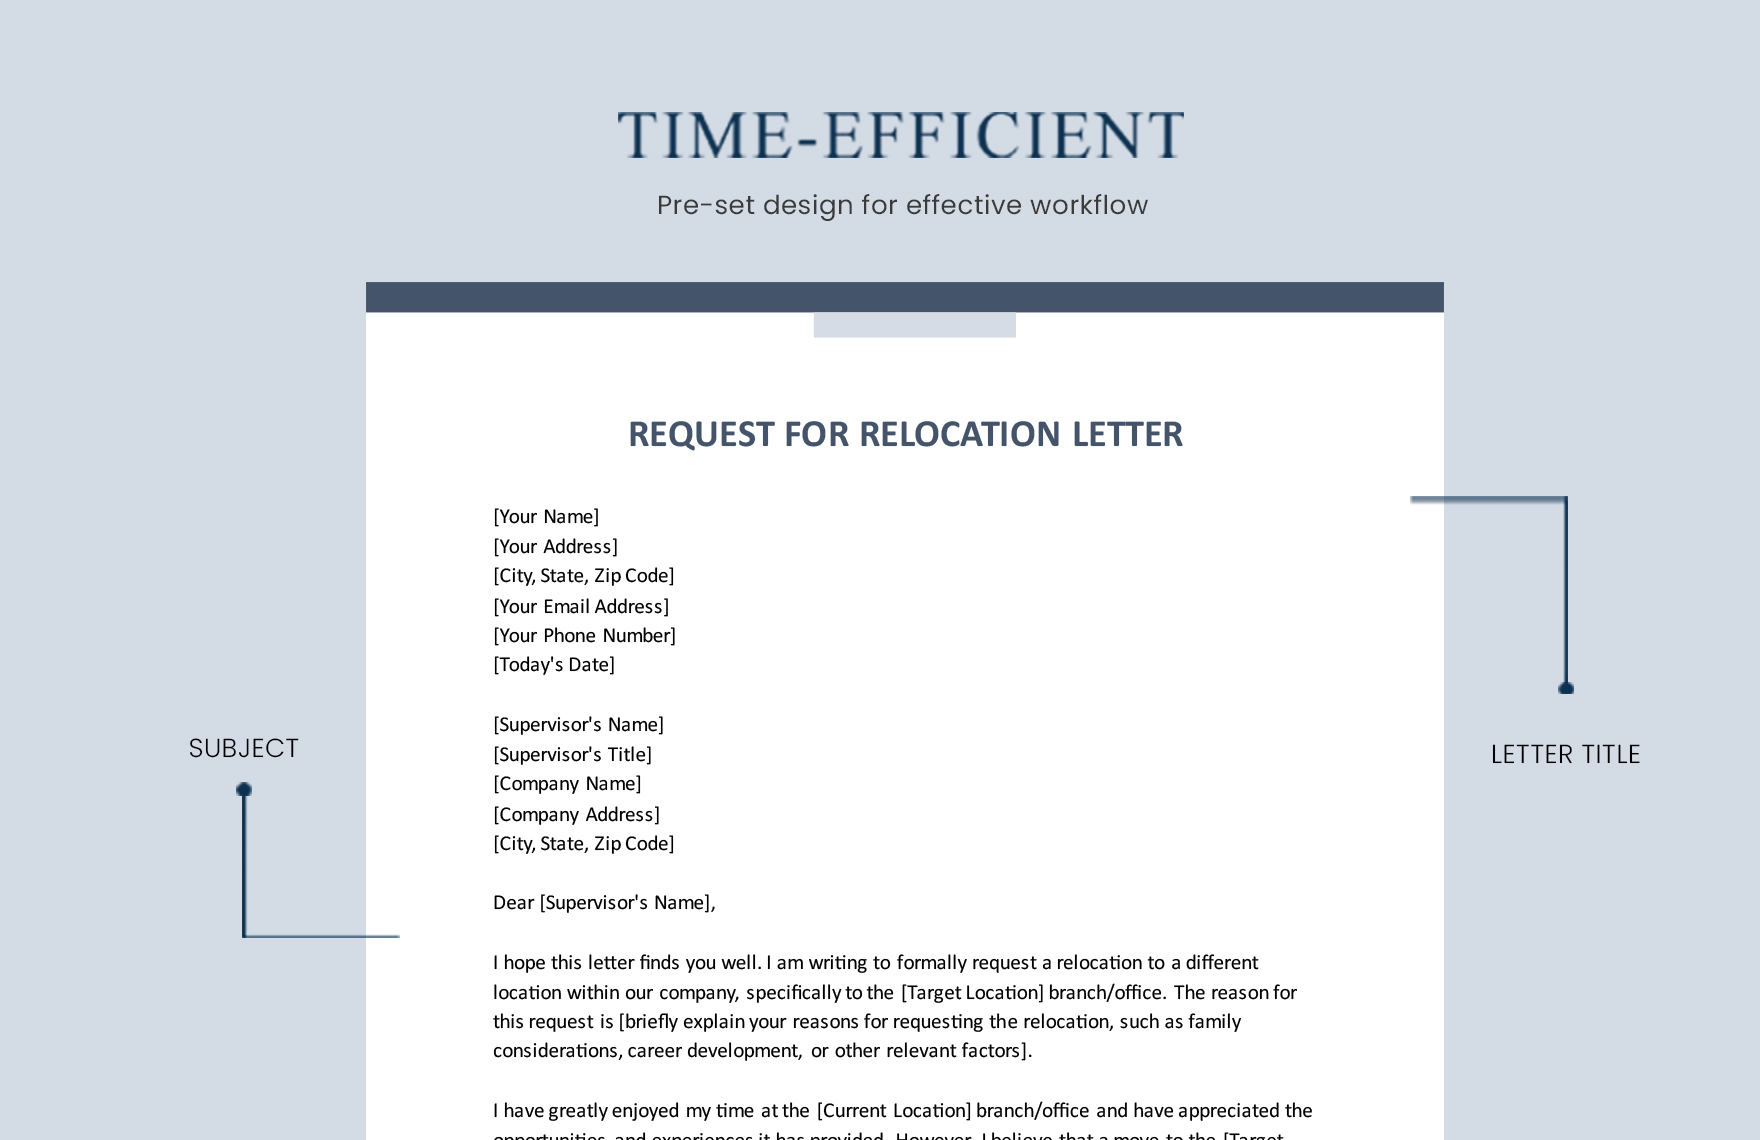 Request For Relocation Letter